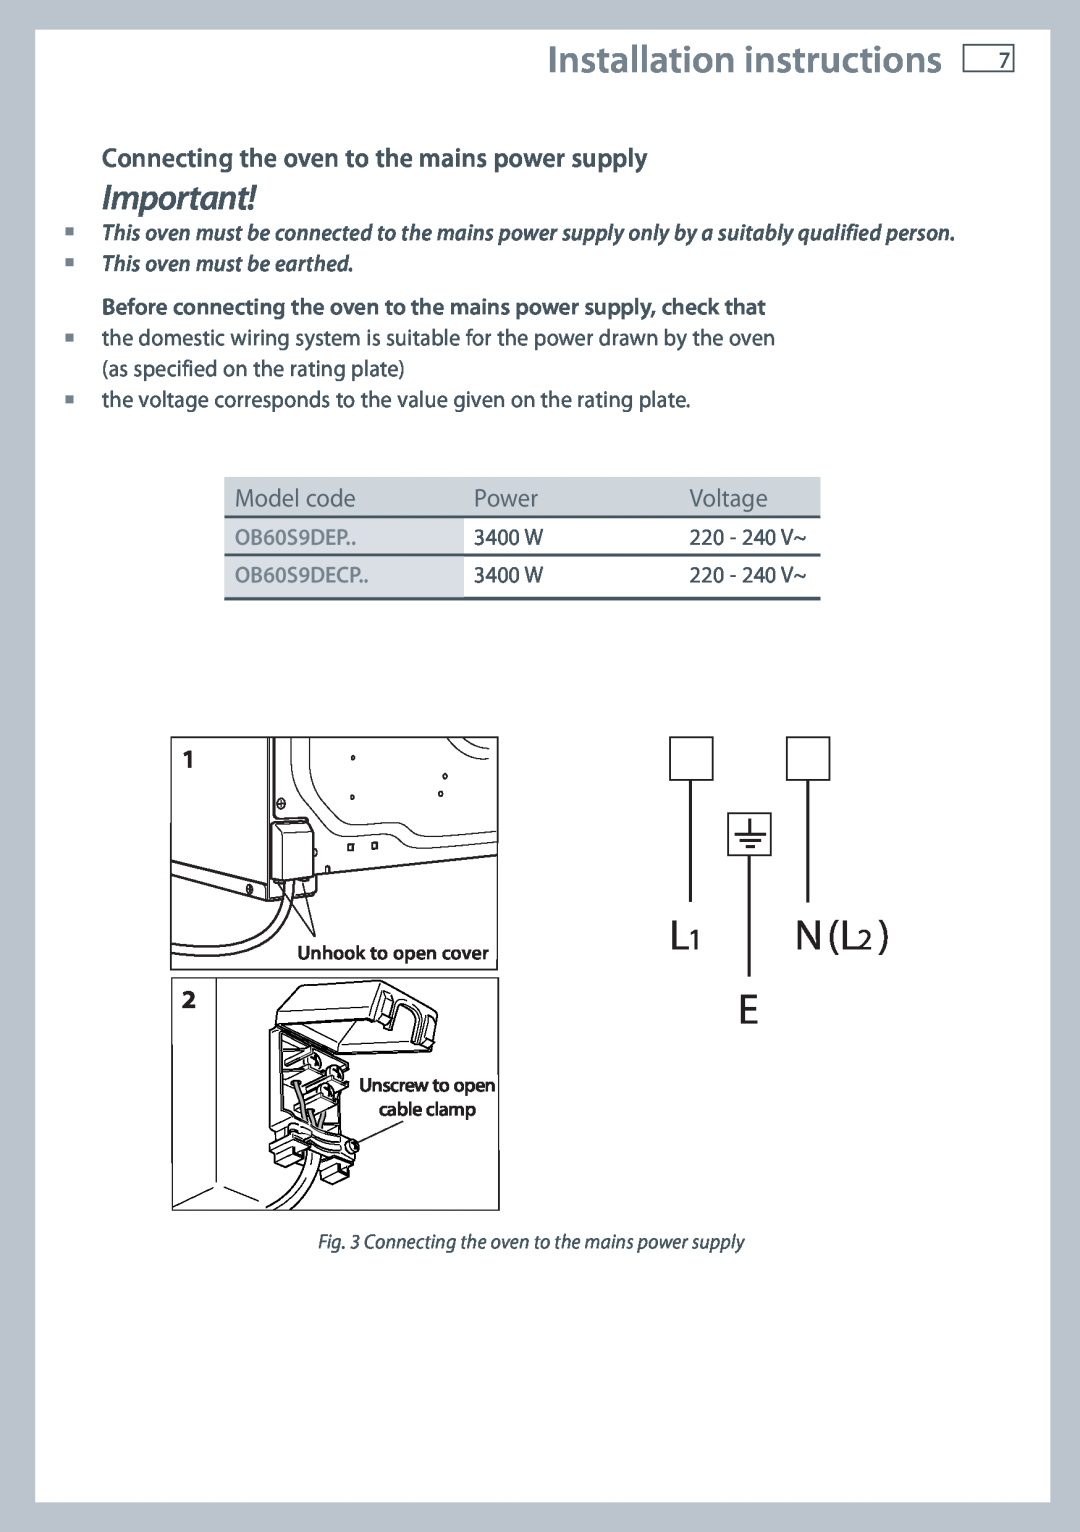 Fisher & Paykel OB60S9DECP Installation instructions, N L2, Connecting the oven to the mains power supply, Model code 